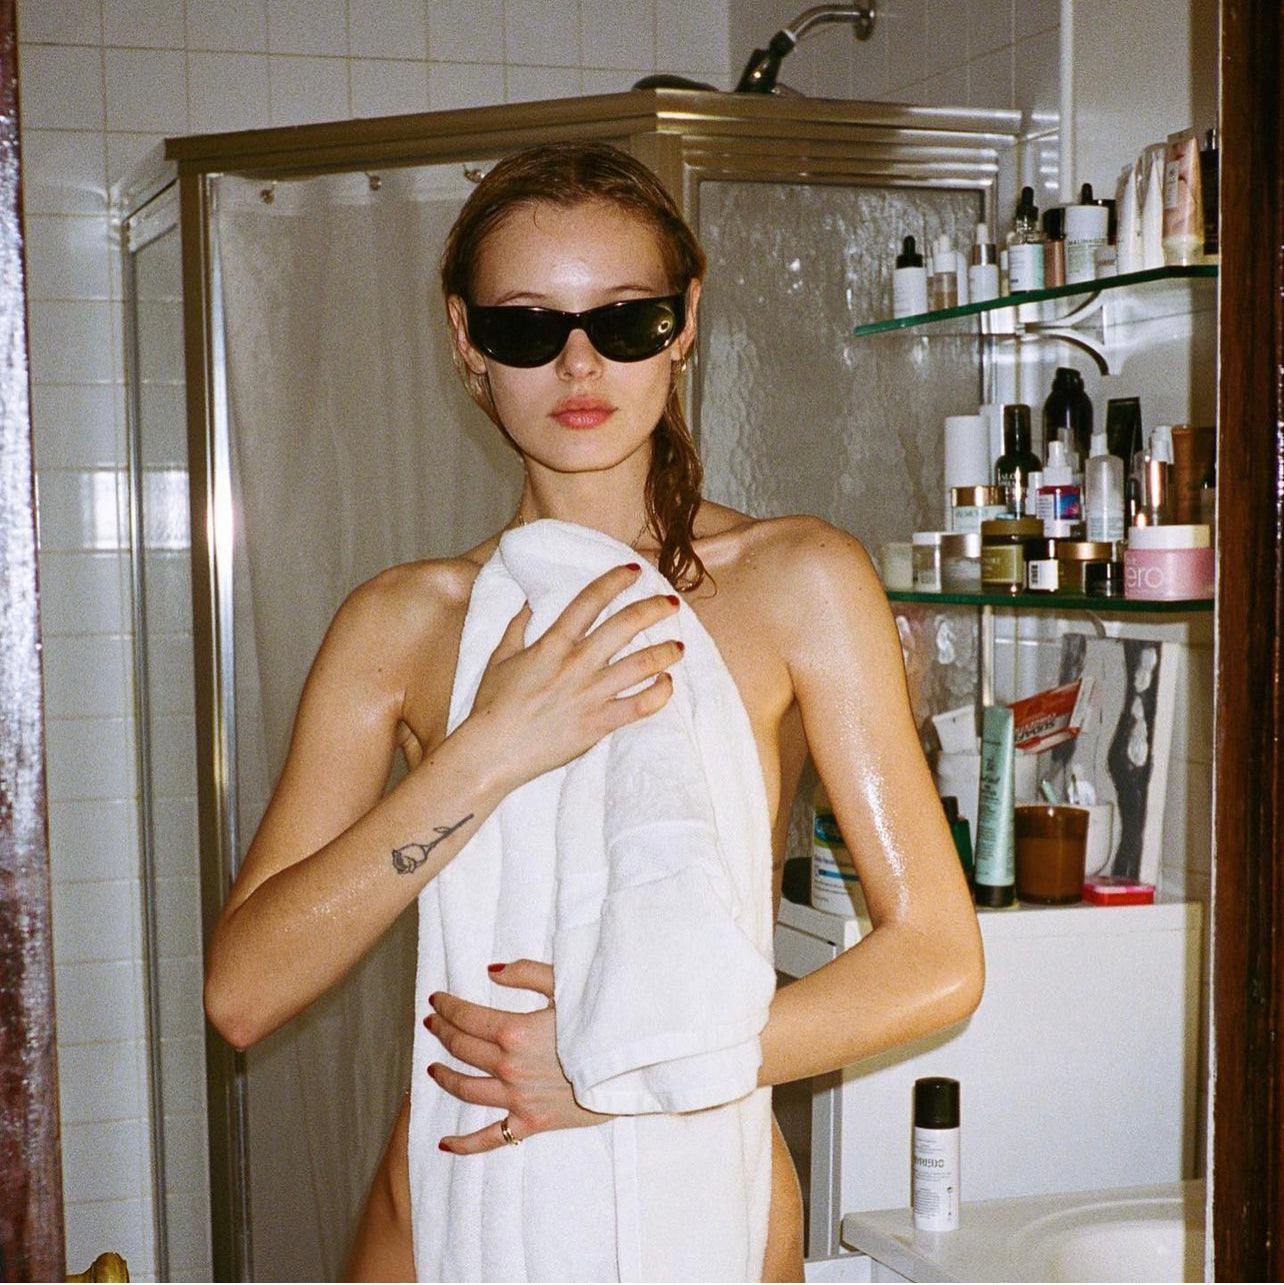 A Step-by-Step Guide to the EVERYTHING SHOWER